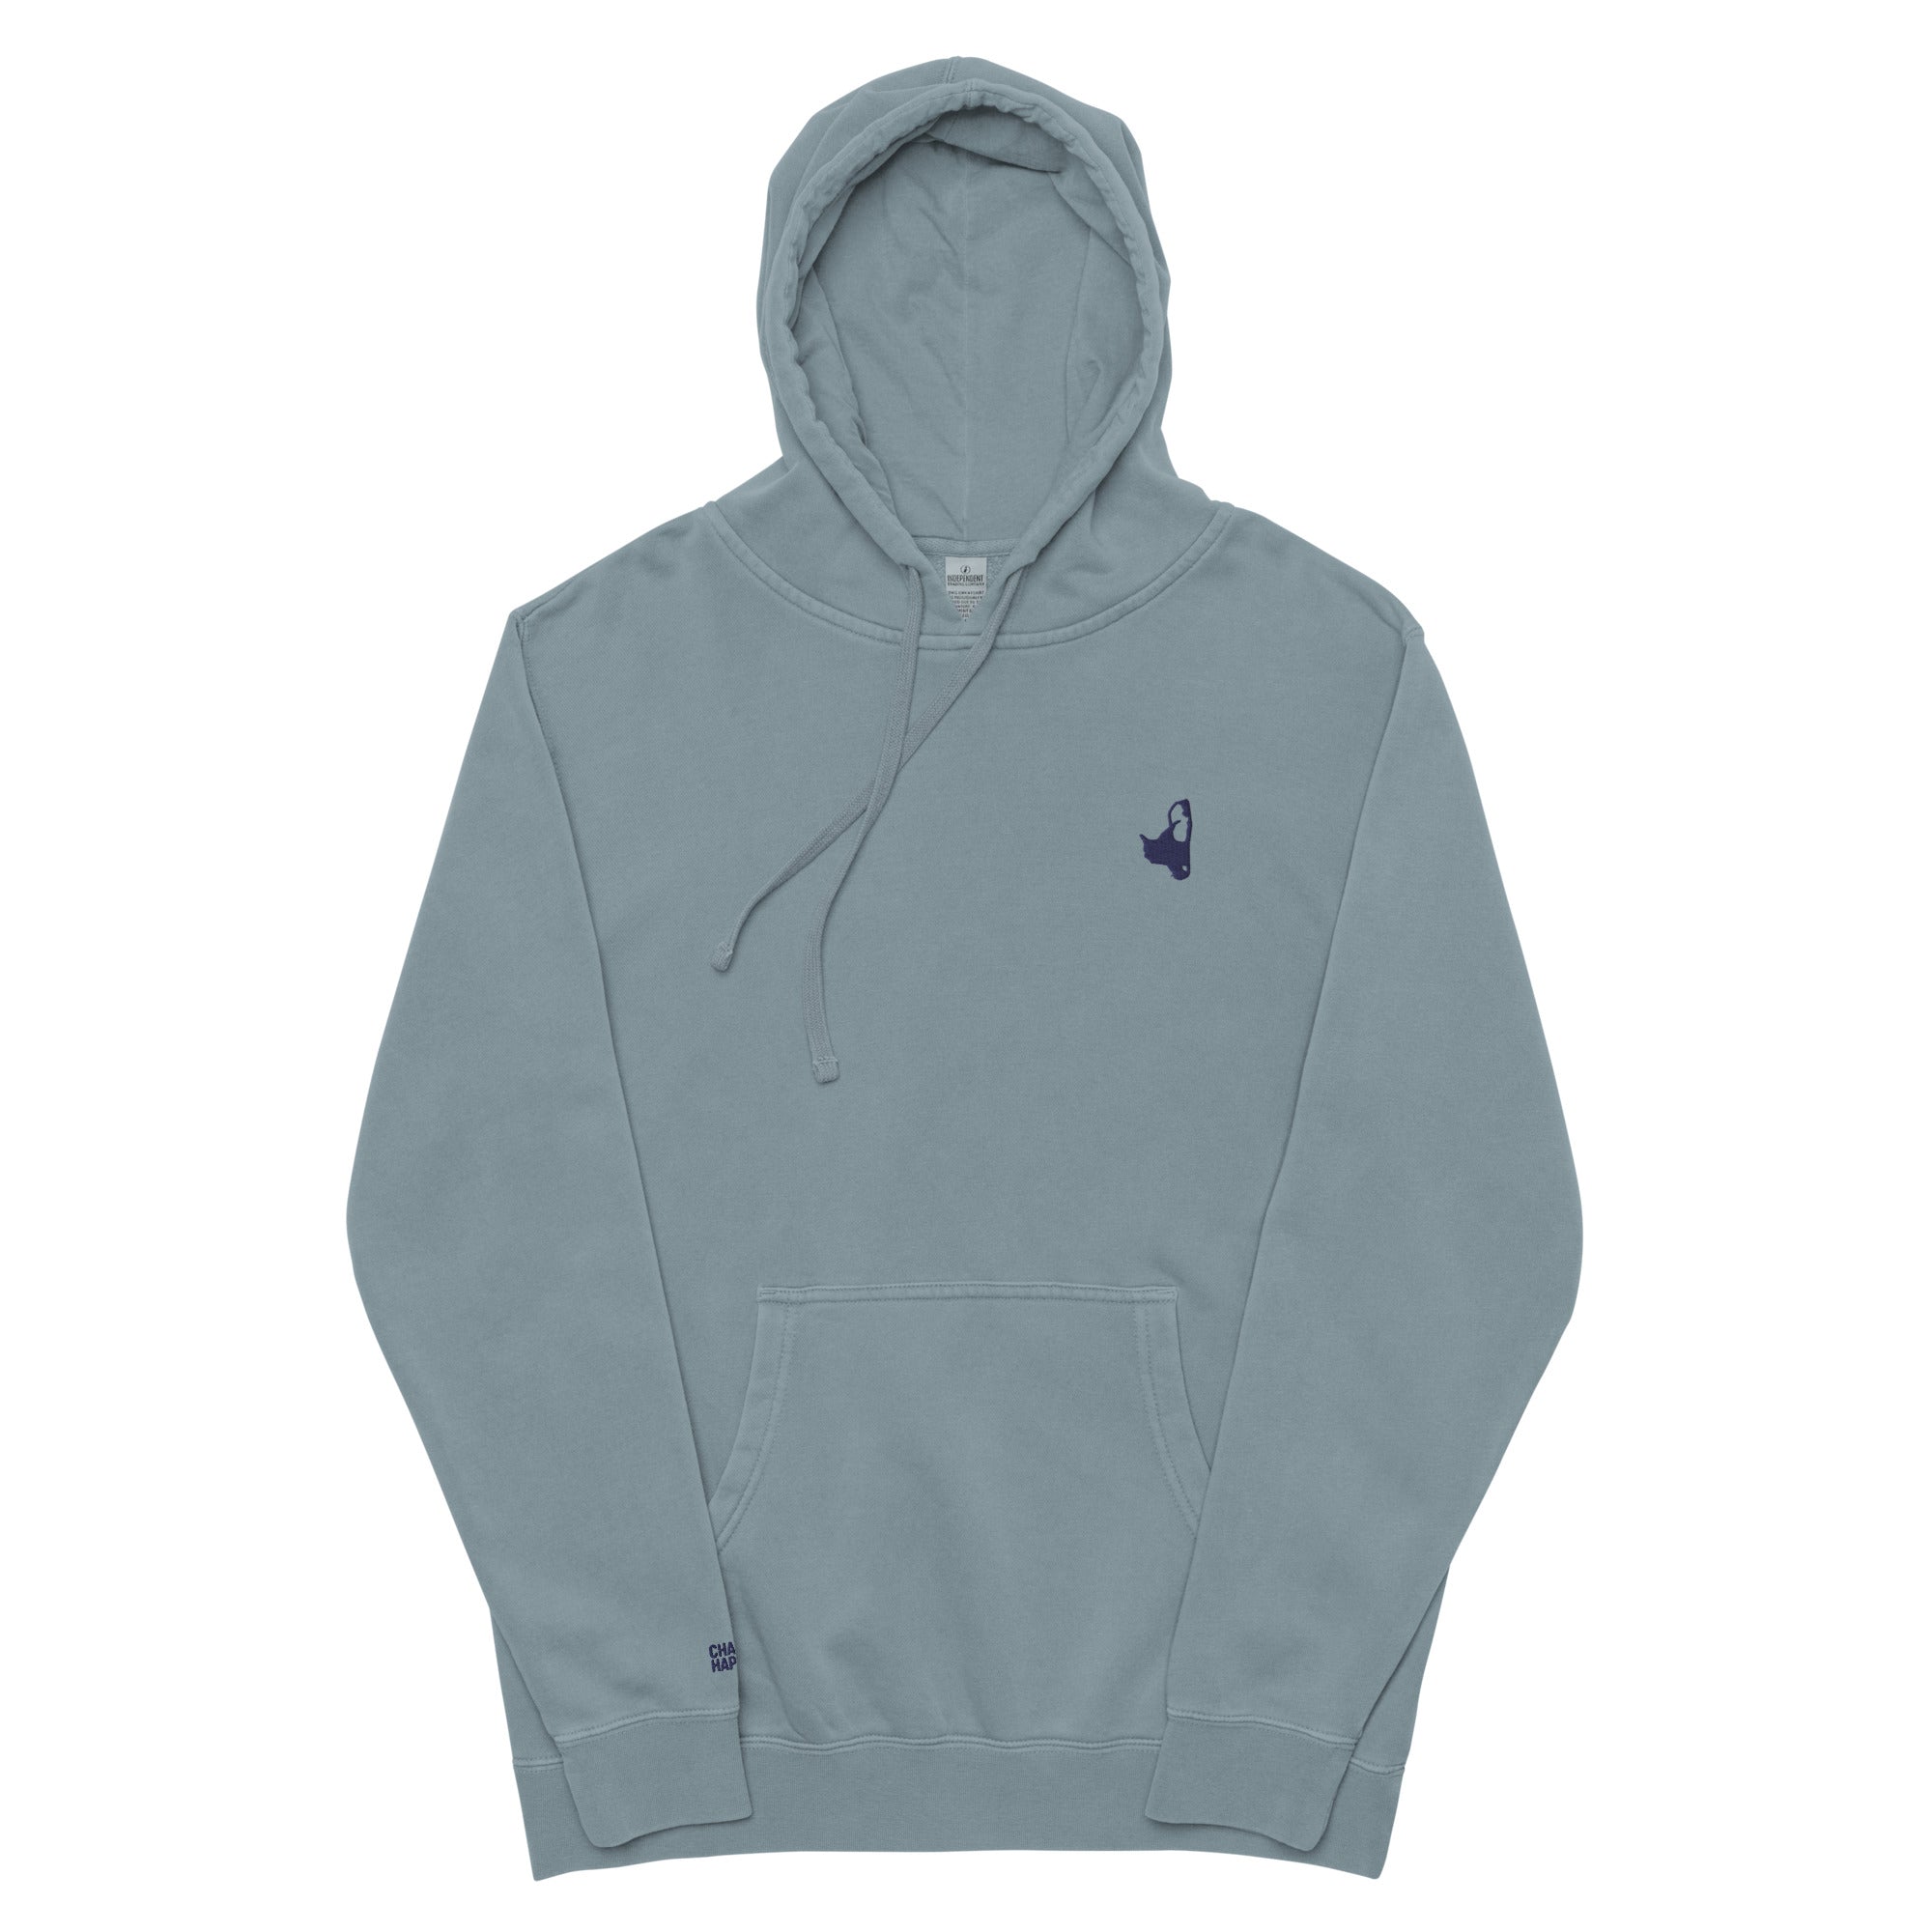 Our Island Hoodie